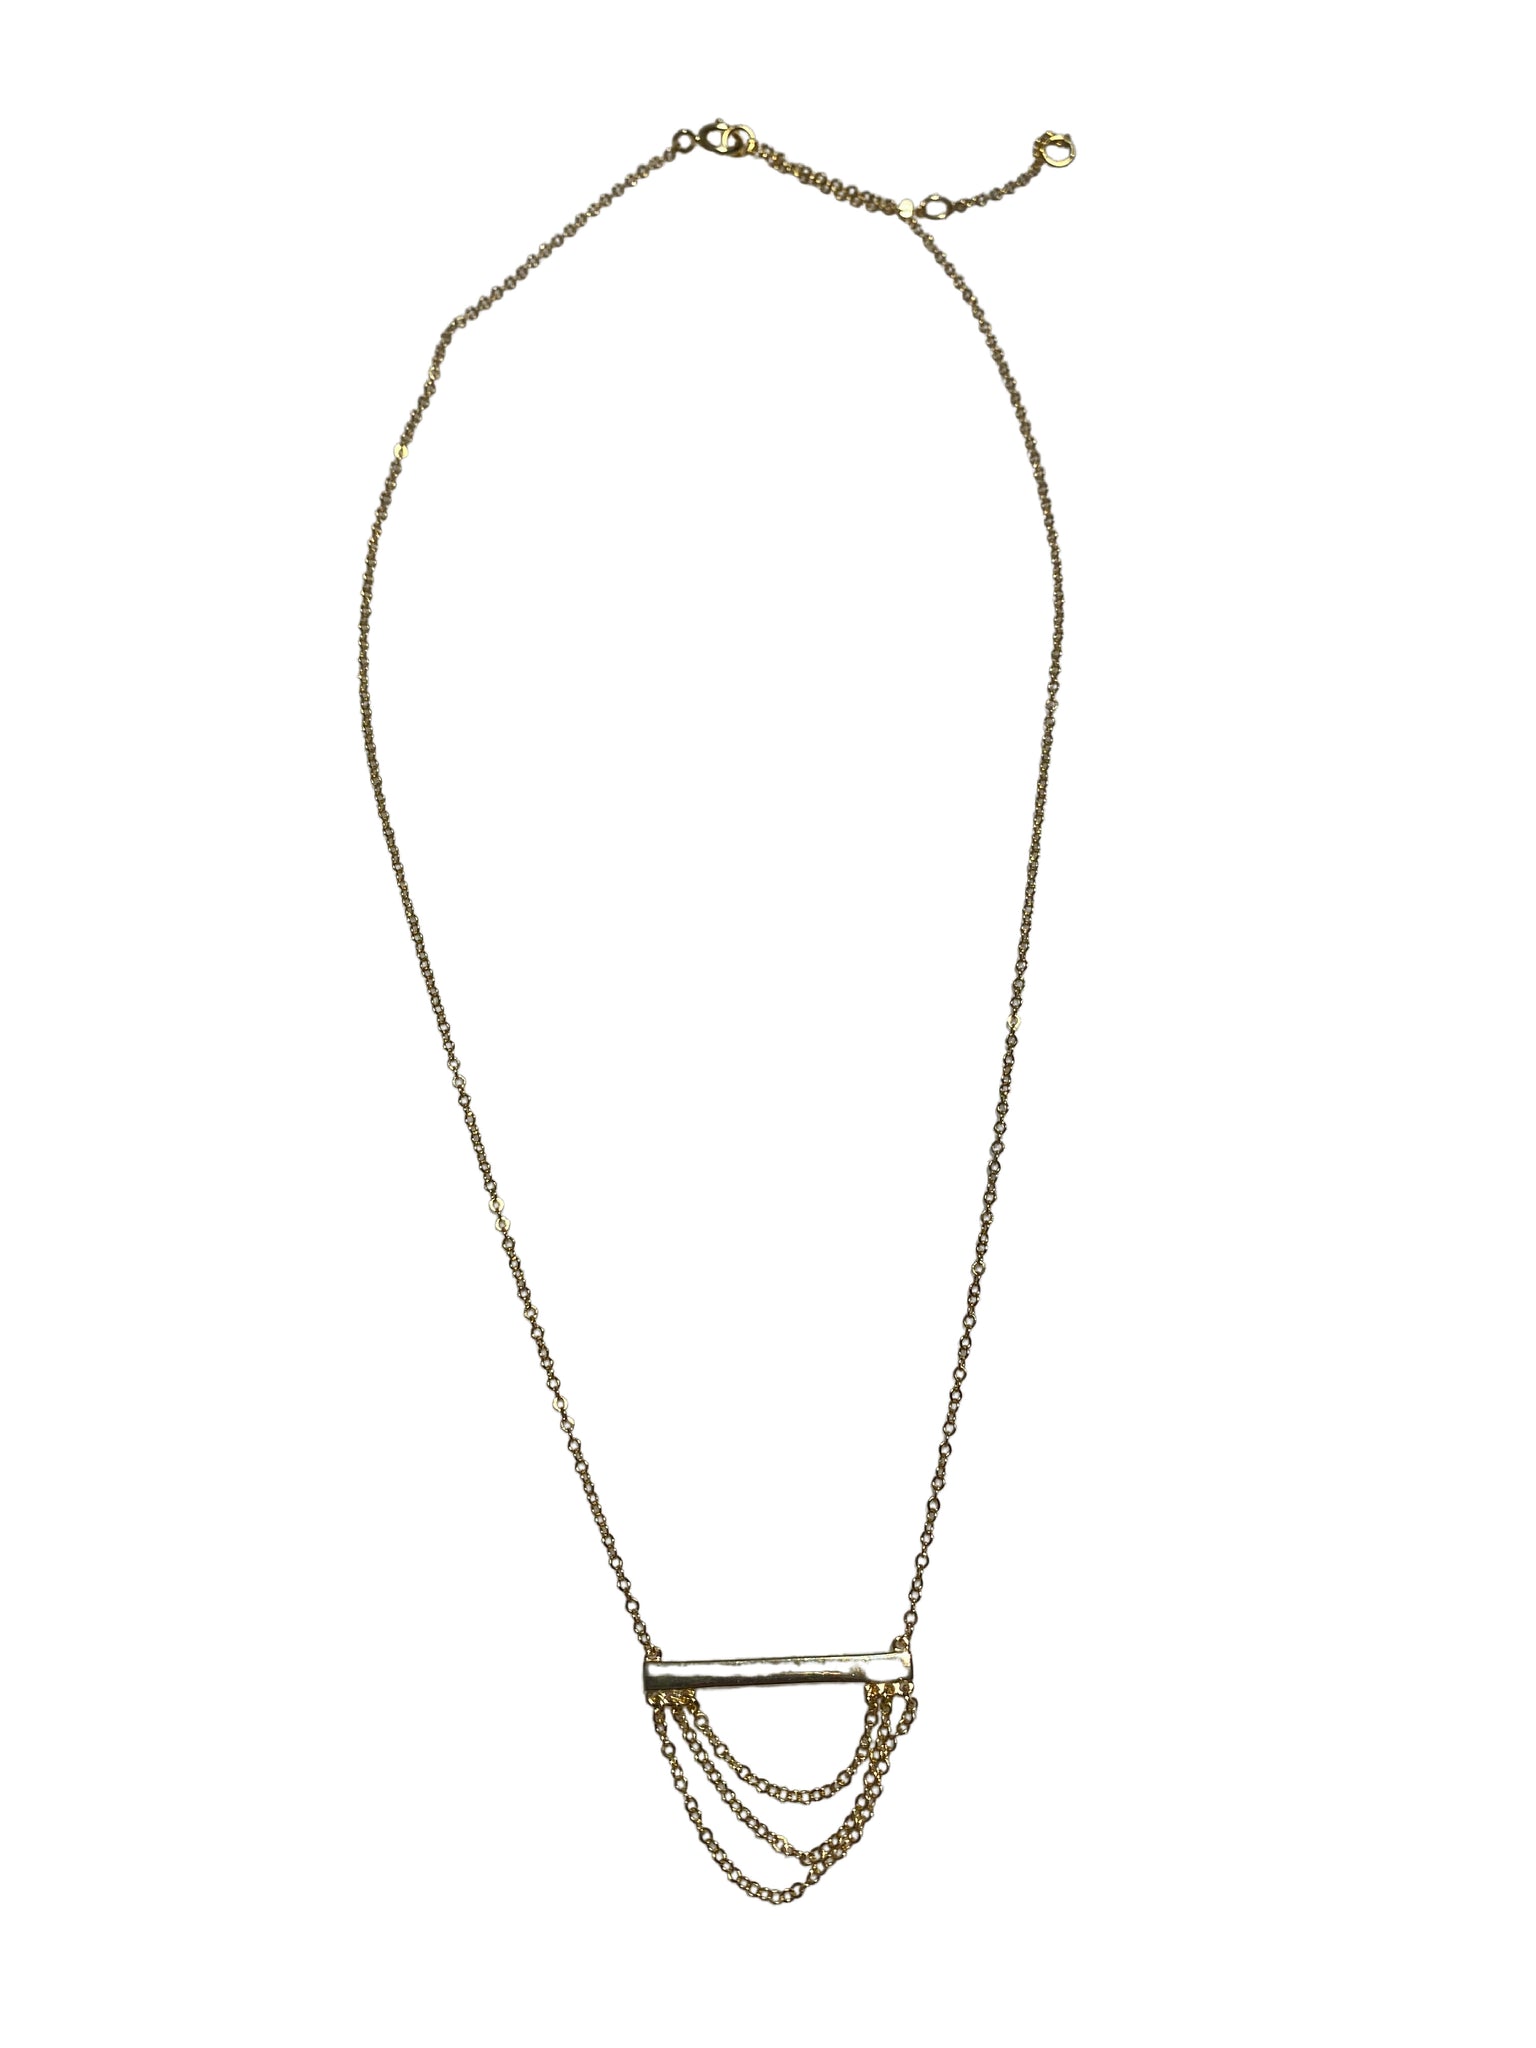 SS-Gold Thin Bar w/Hanging Chains